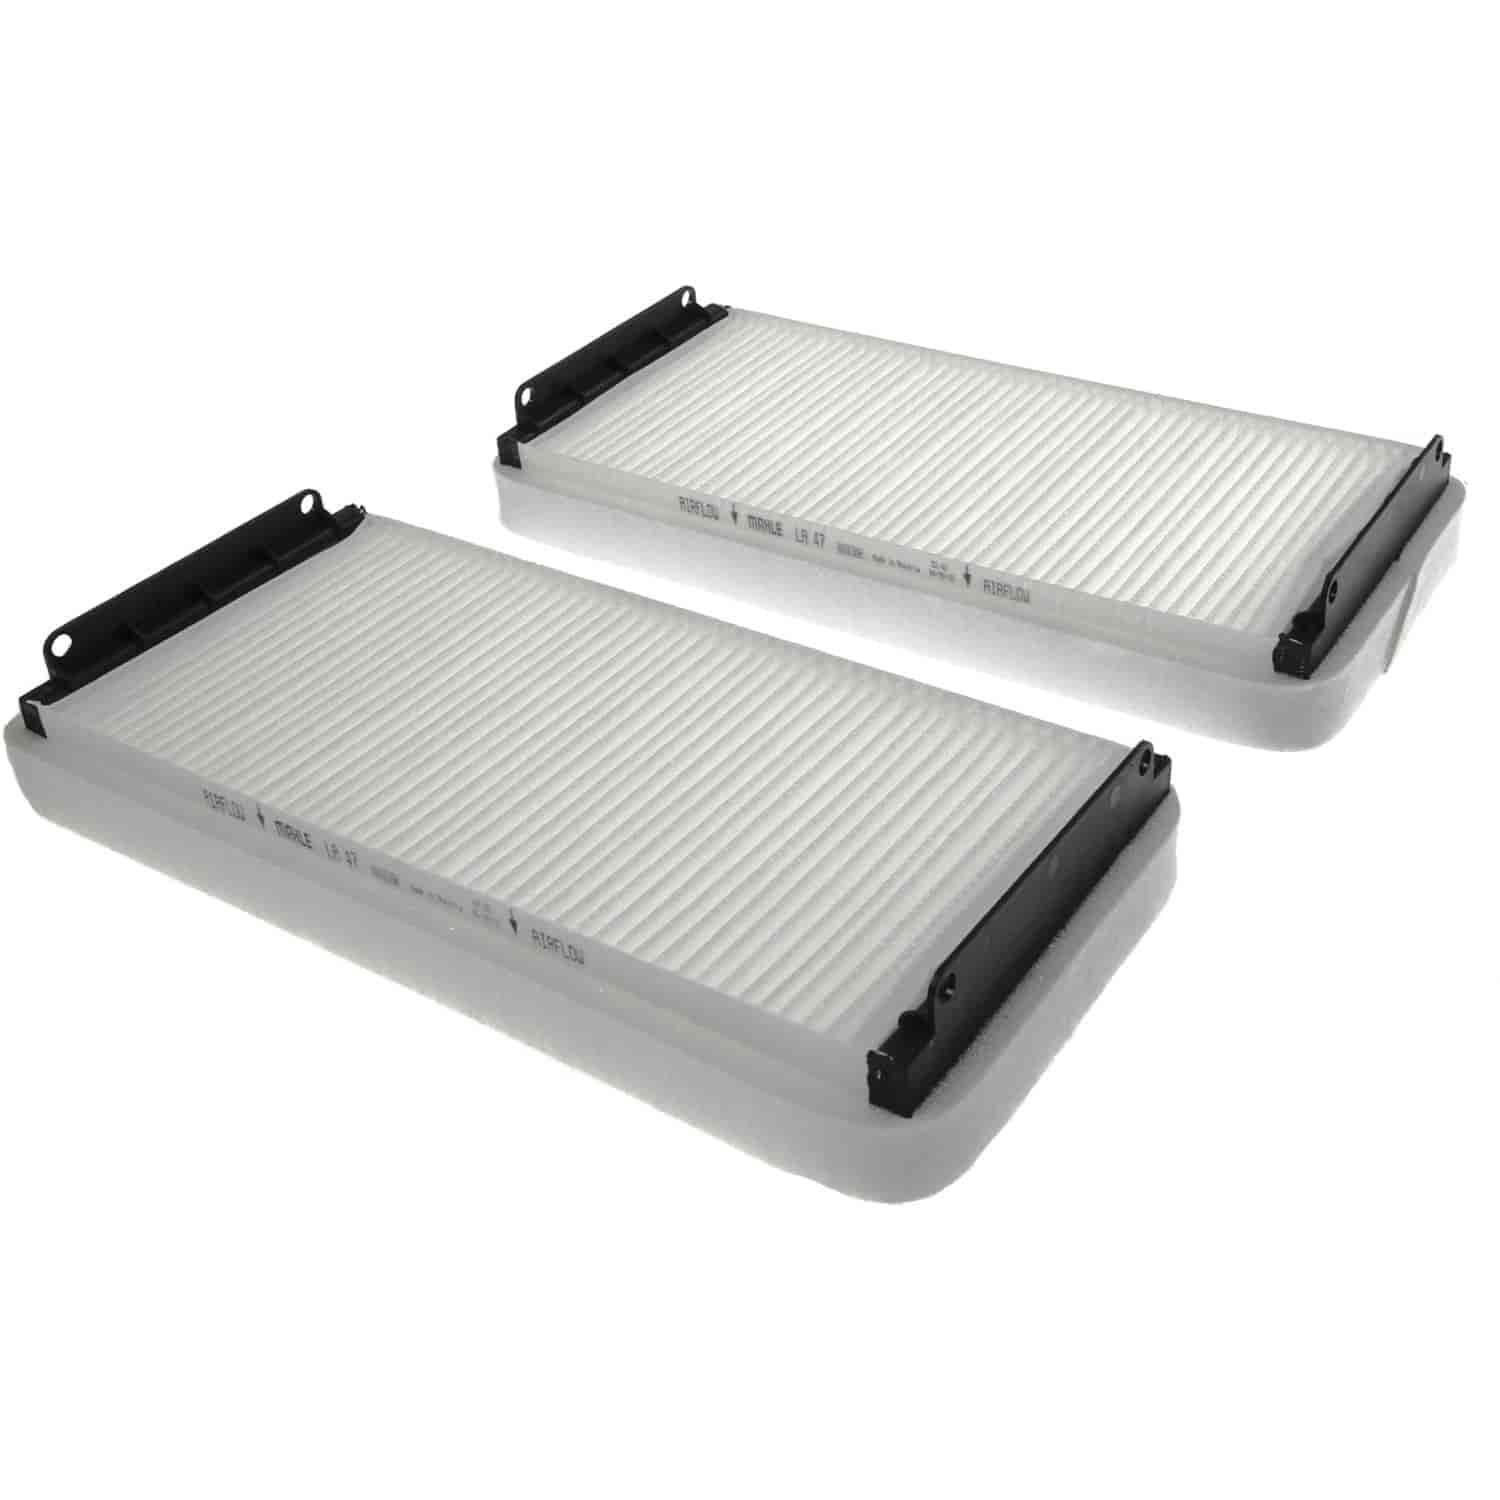 Mahle Cabin Air Filter Mercedes CLK CL Class E Class S Class 97-06 Dust filter for activated